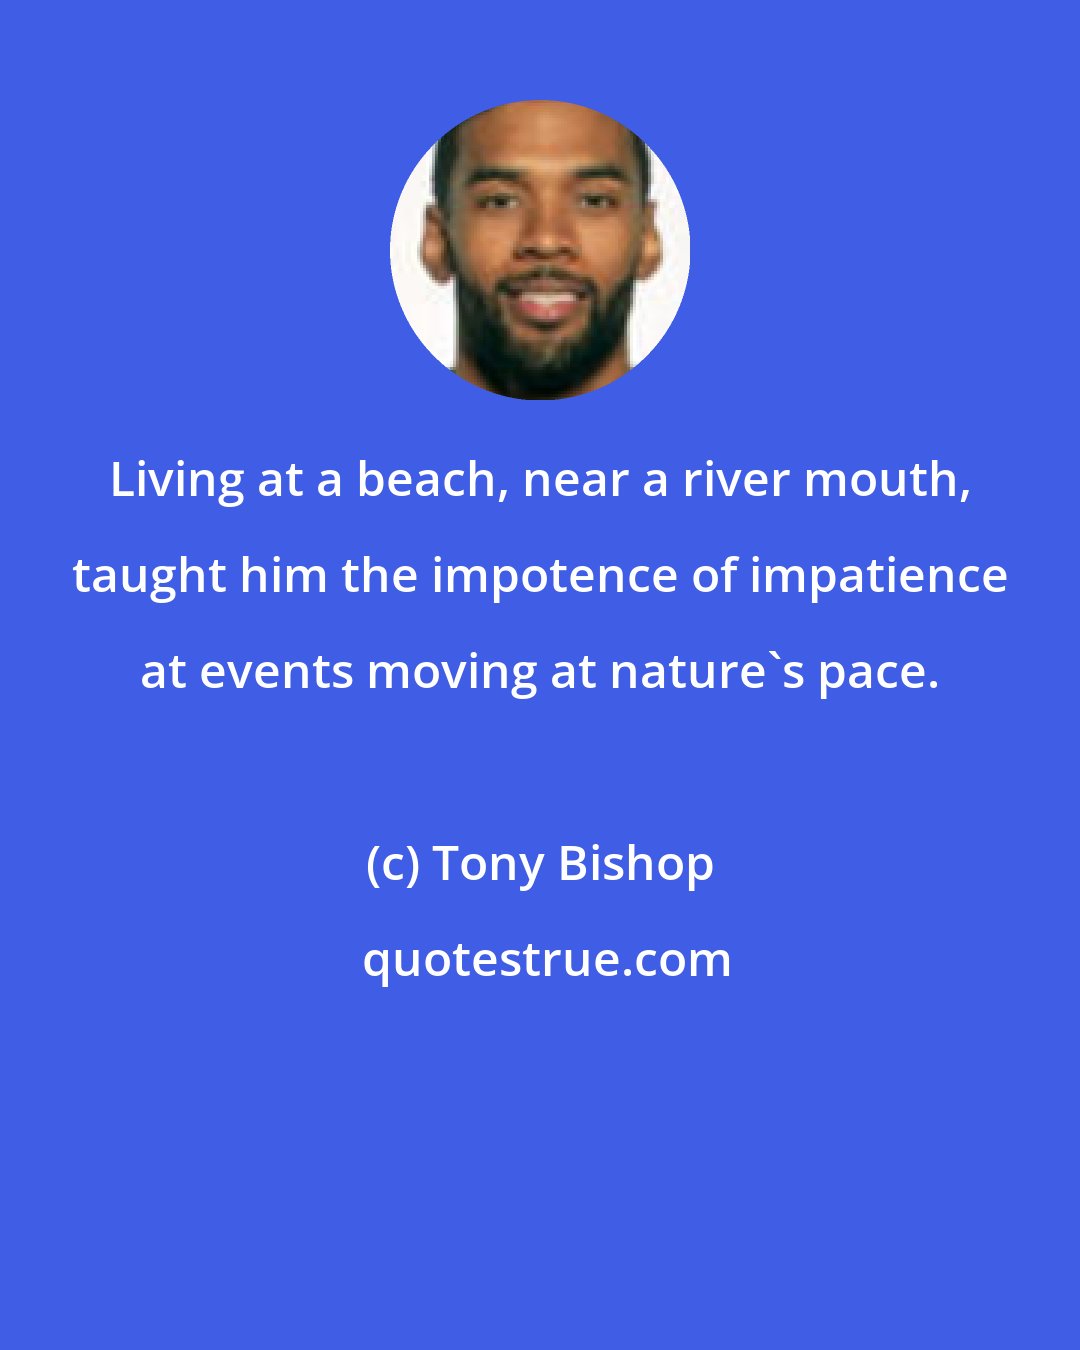 Tony Bishop: Living at a beach, near a river mouth, taught him the impotence of impatience at events moving at nature's pace.